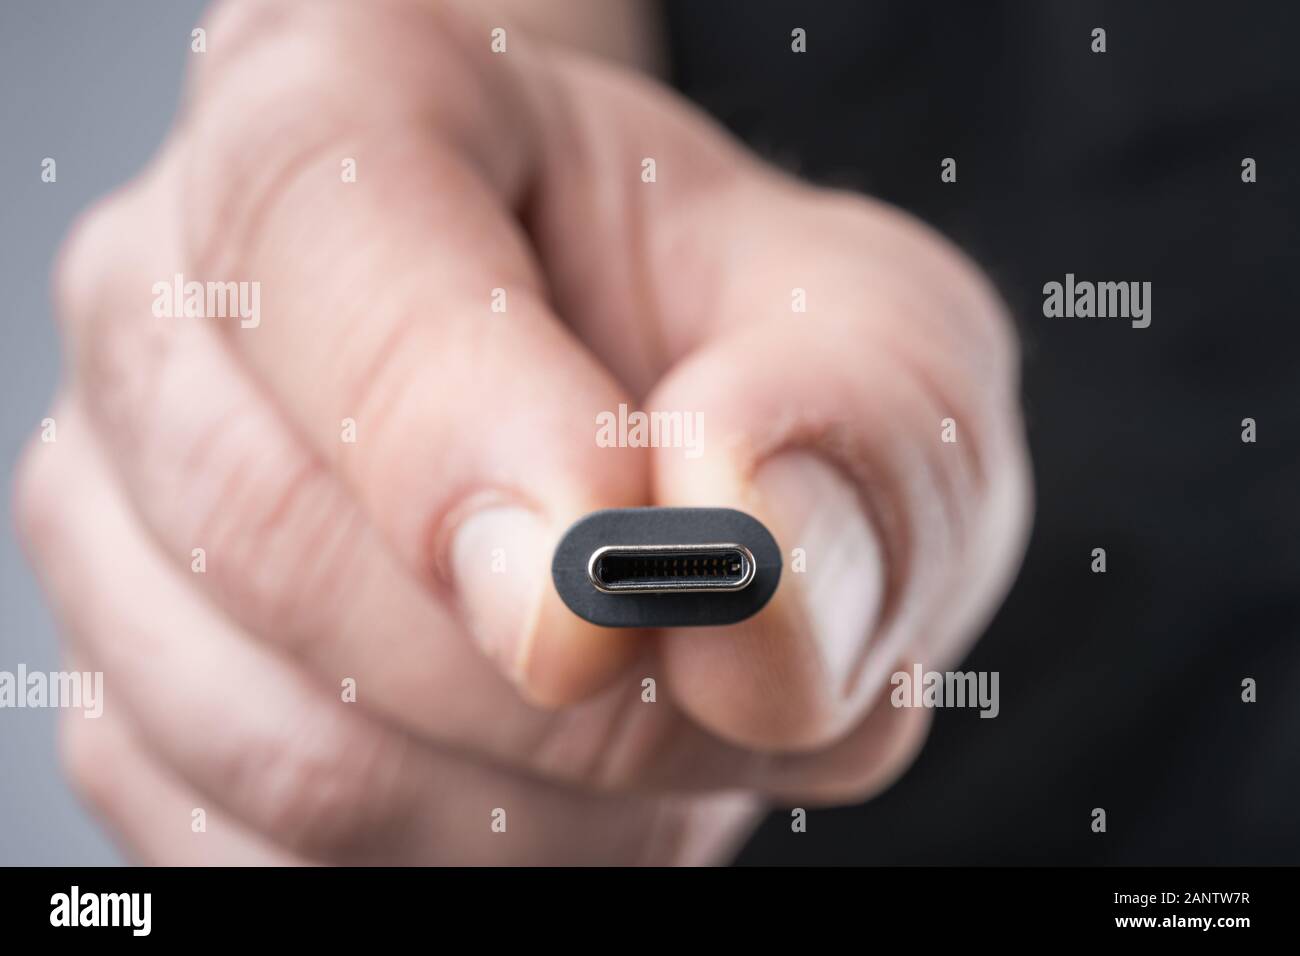 USB Type C connector with a grey cable being held in hand. Shallow depth of field. Stock Photo